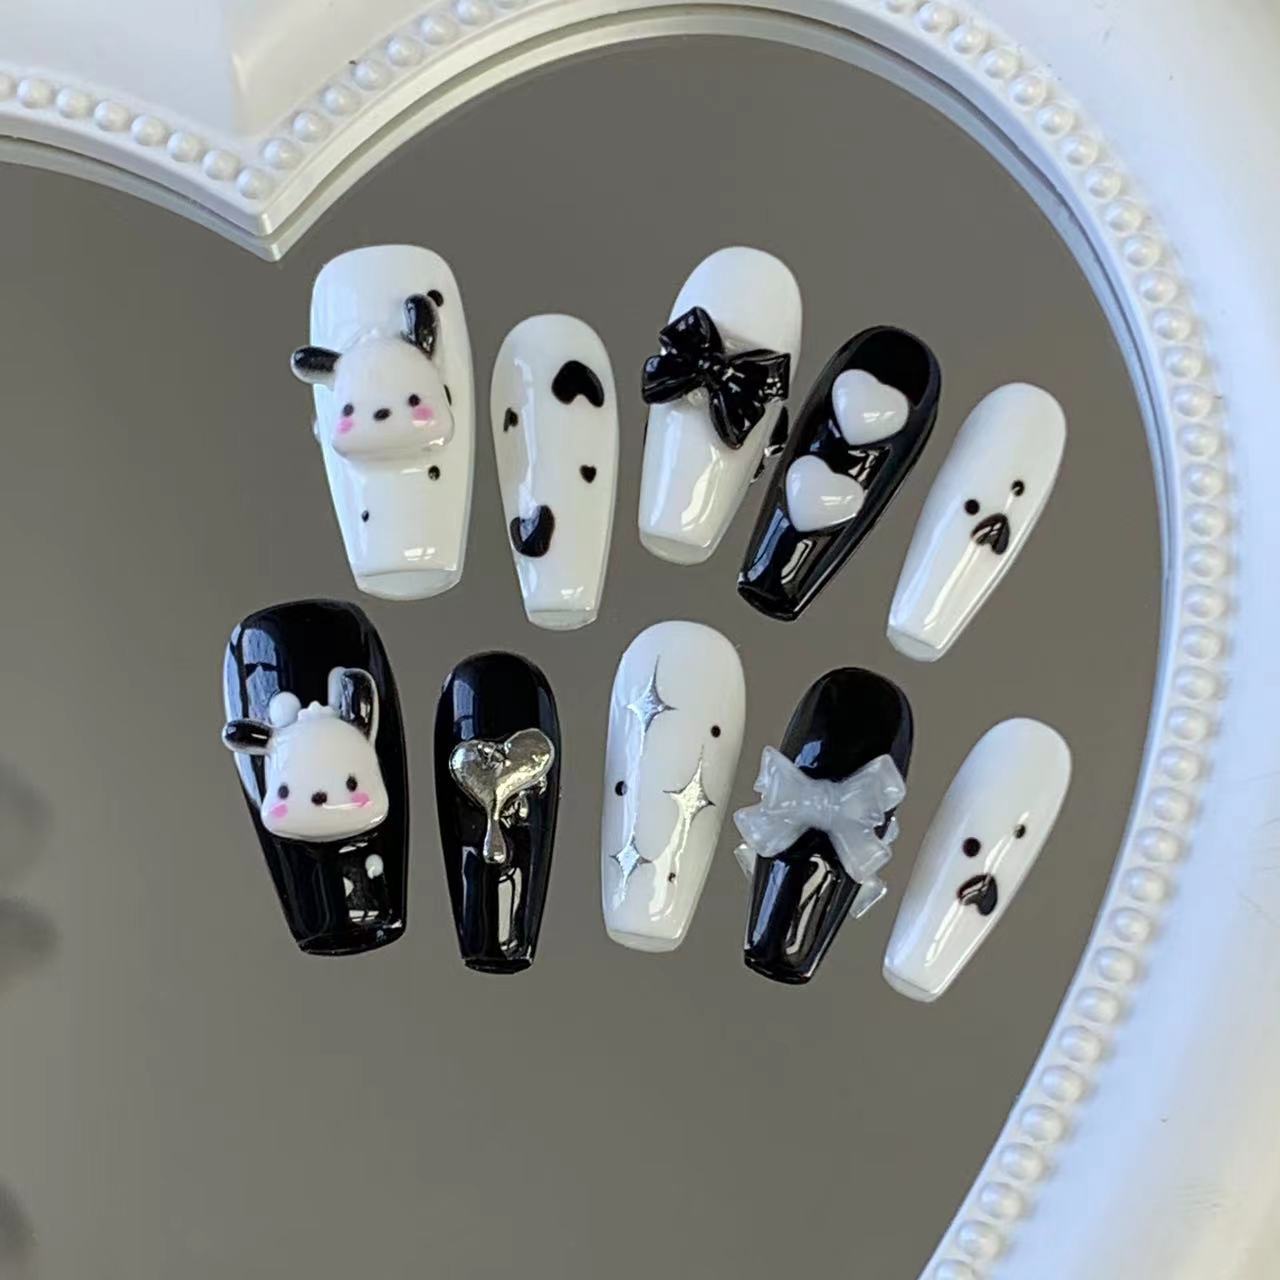 POCHACCO-TEN PIECES OF HANDCRAFTED PRESS ON NAIL